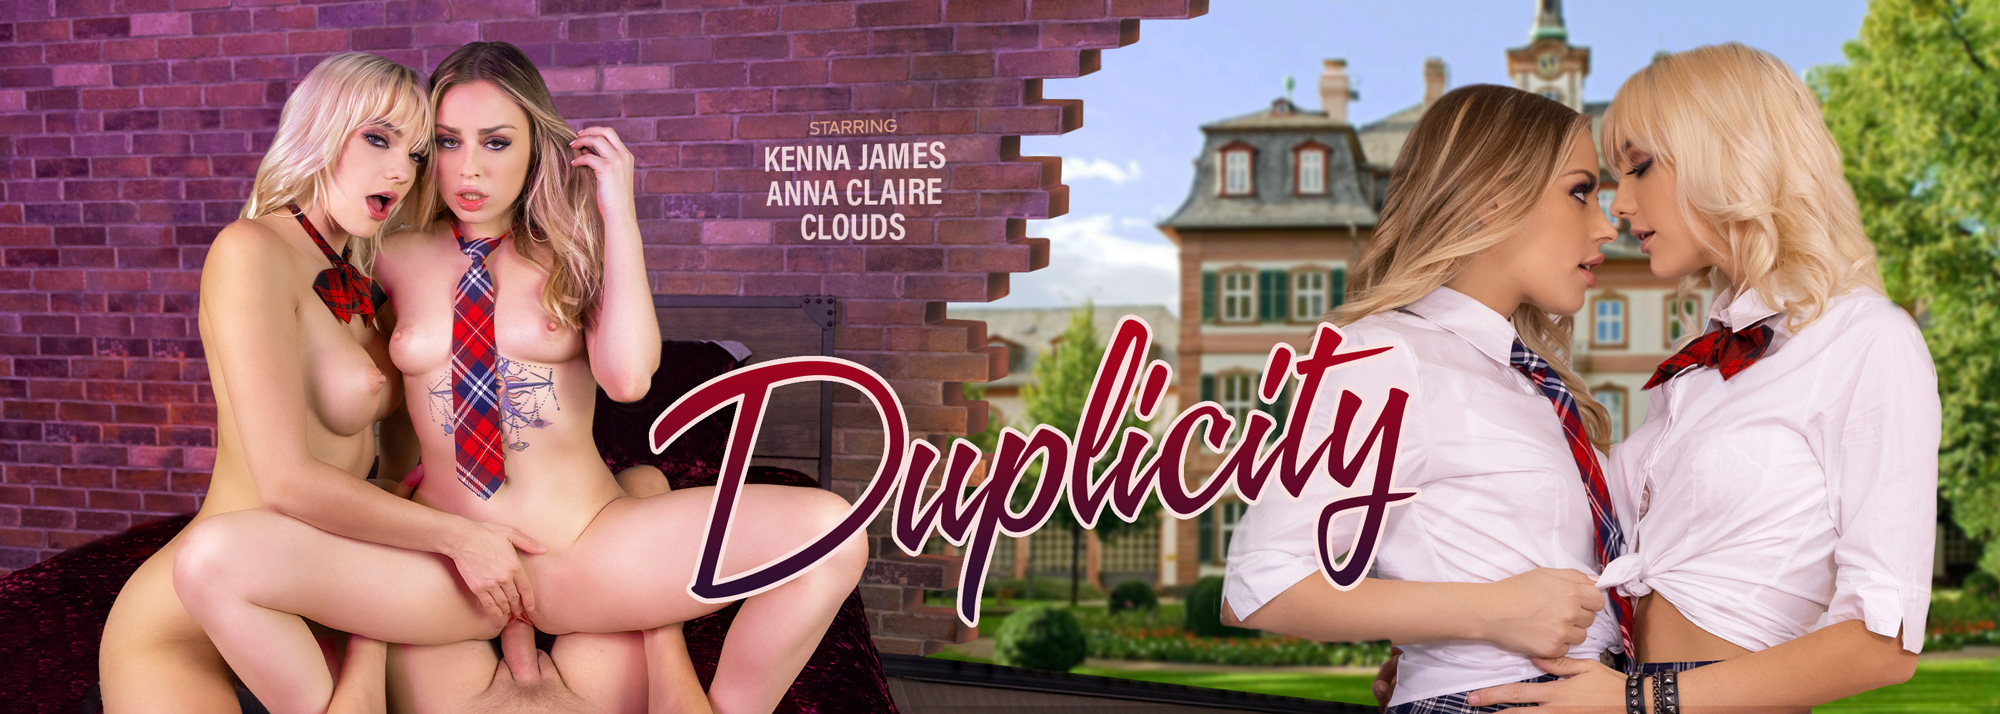 Duplicity - VR Porn Video, Starring: Anna Claire Clouds, Kenna James